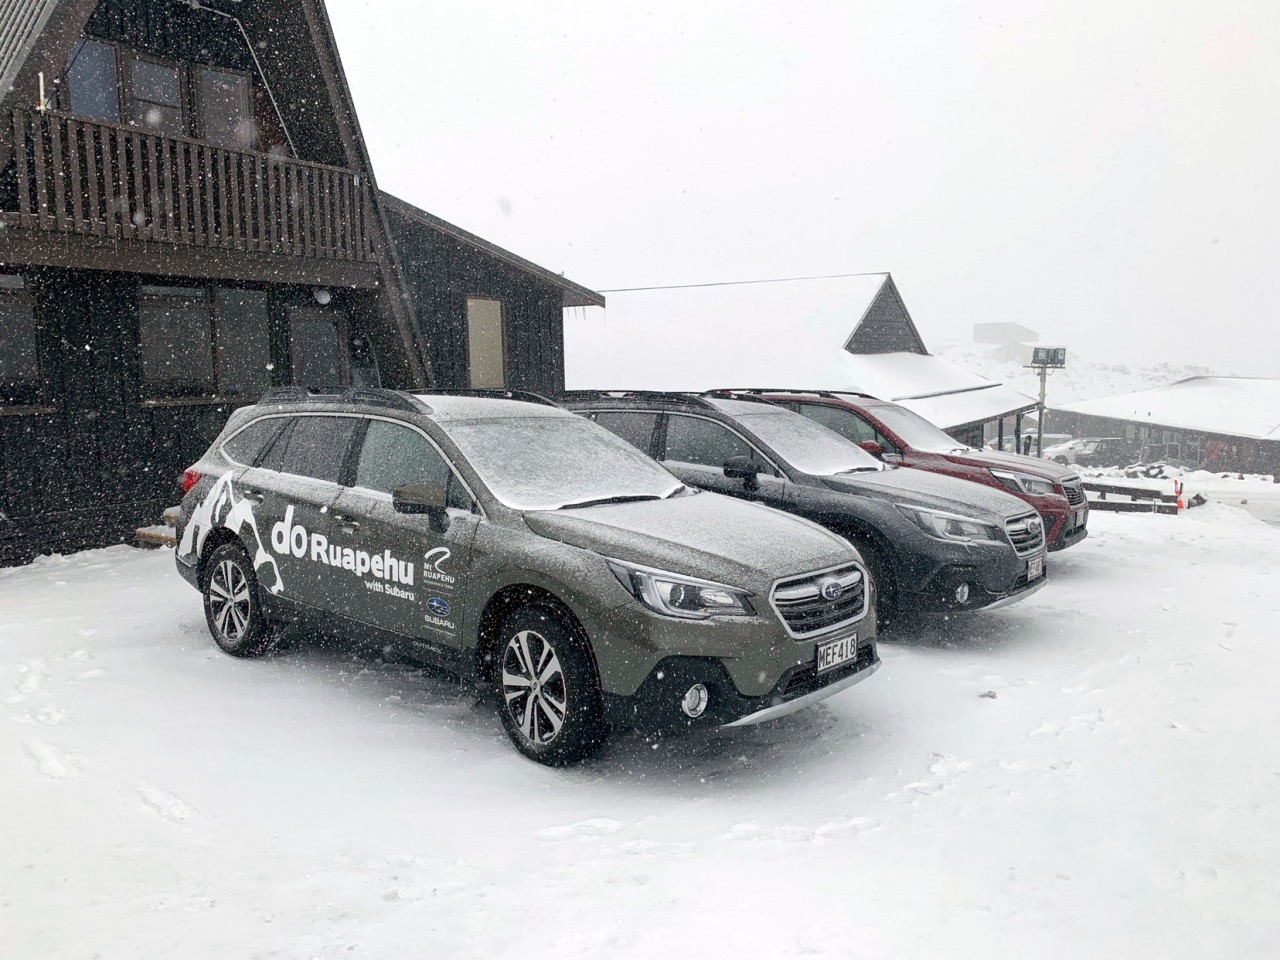 Lined up here in the snow, RAL's fleet of Subaru vehicles are the perfect cars for all conditions.